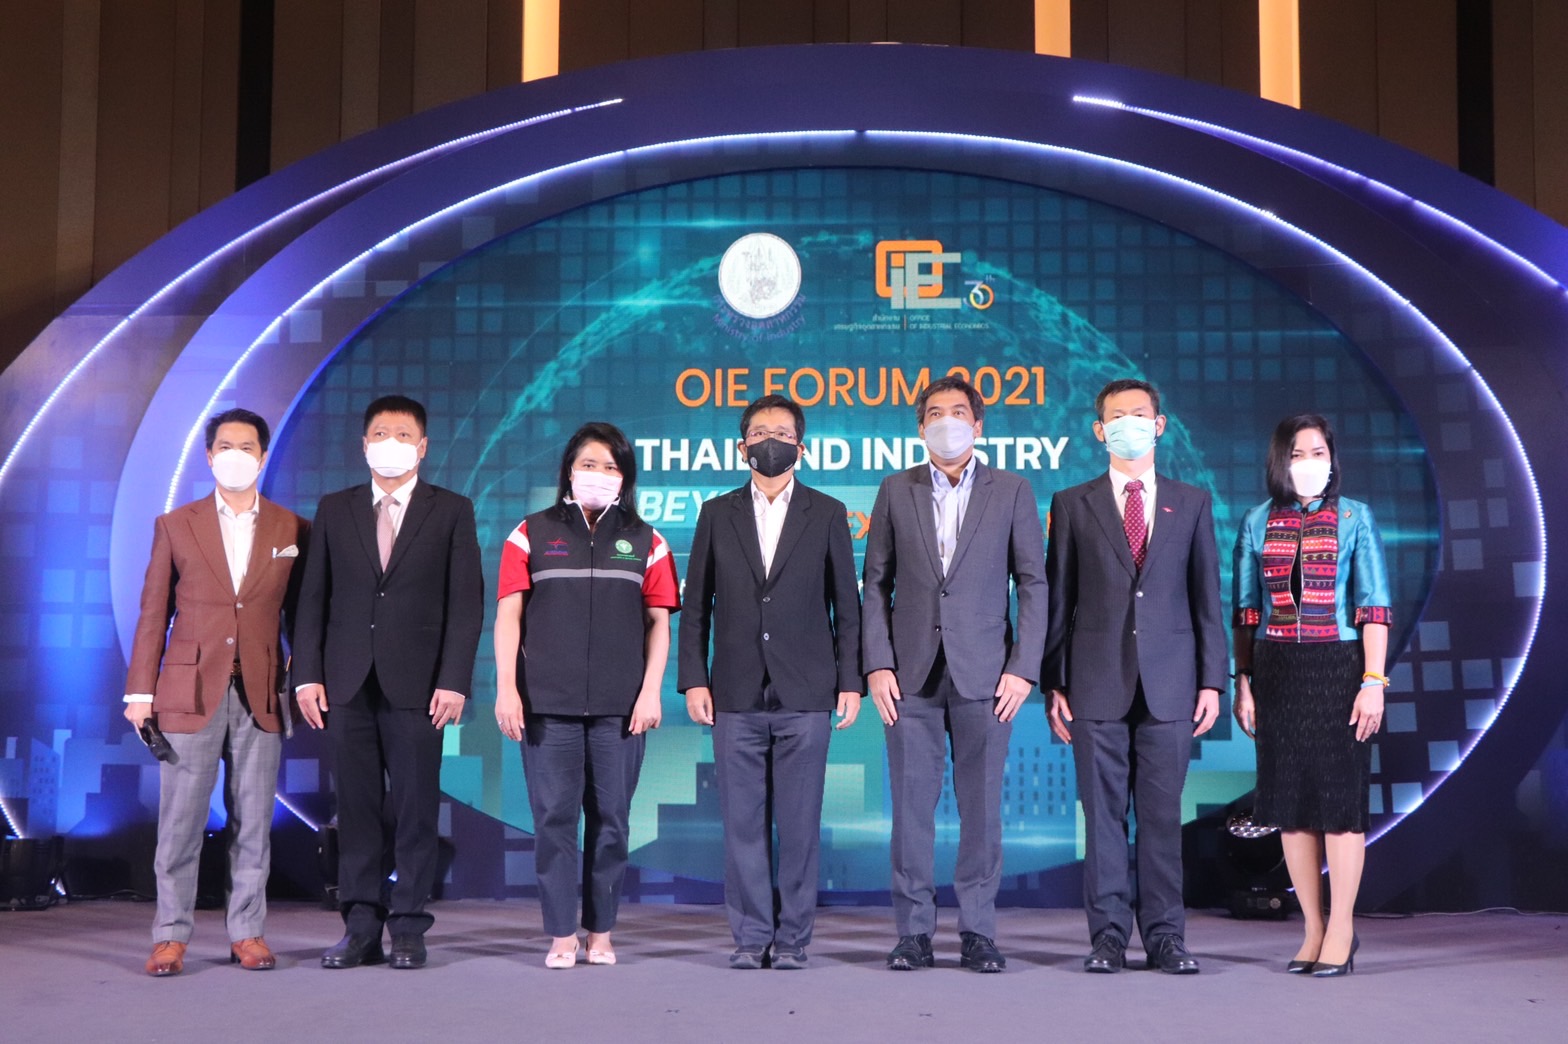 Annual OEI Forum 2021: Thailand Industry Beyond Next Normal